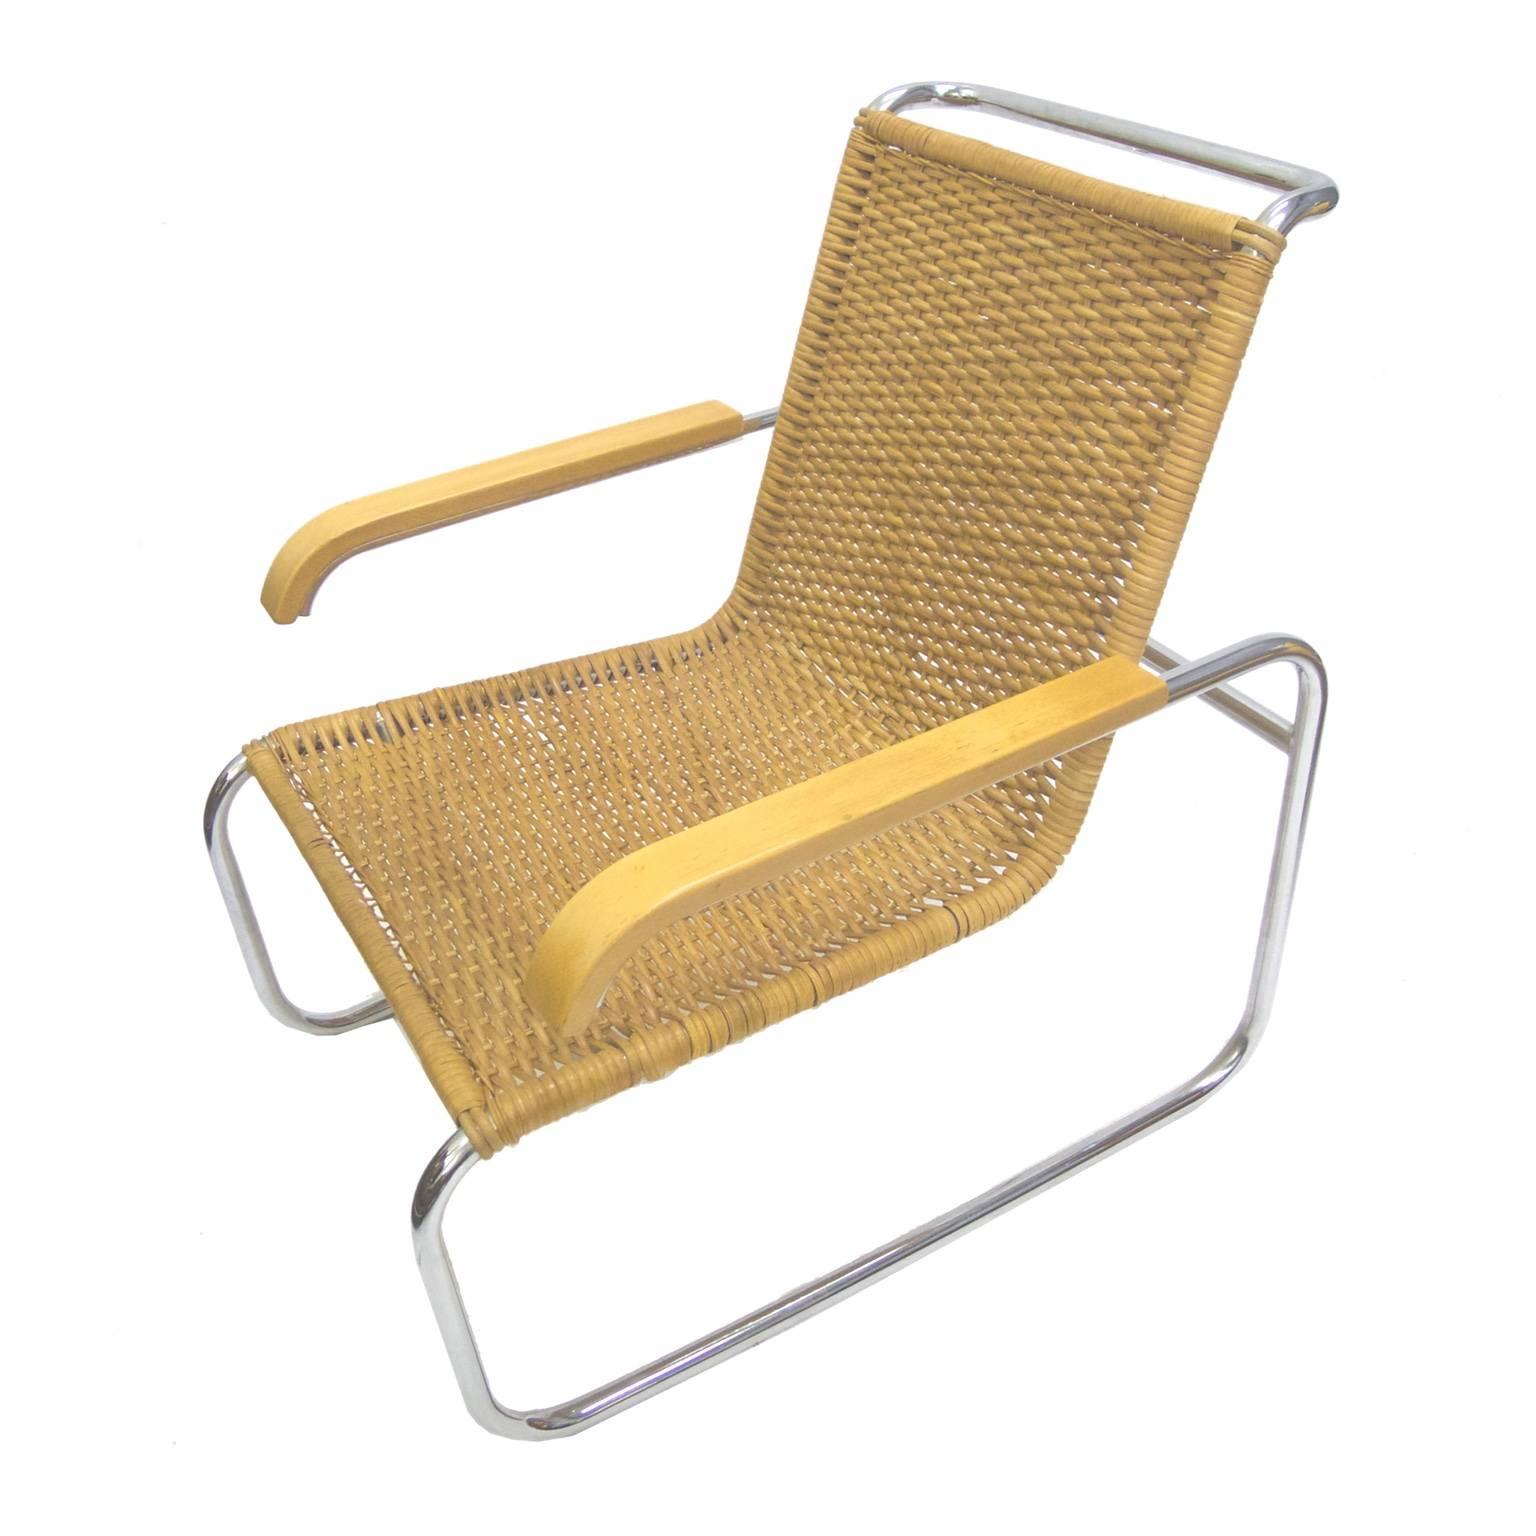 German Marcel Breuer B 35 Lounge Chair for Thonet in Chrome and Woven Rattan